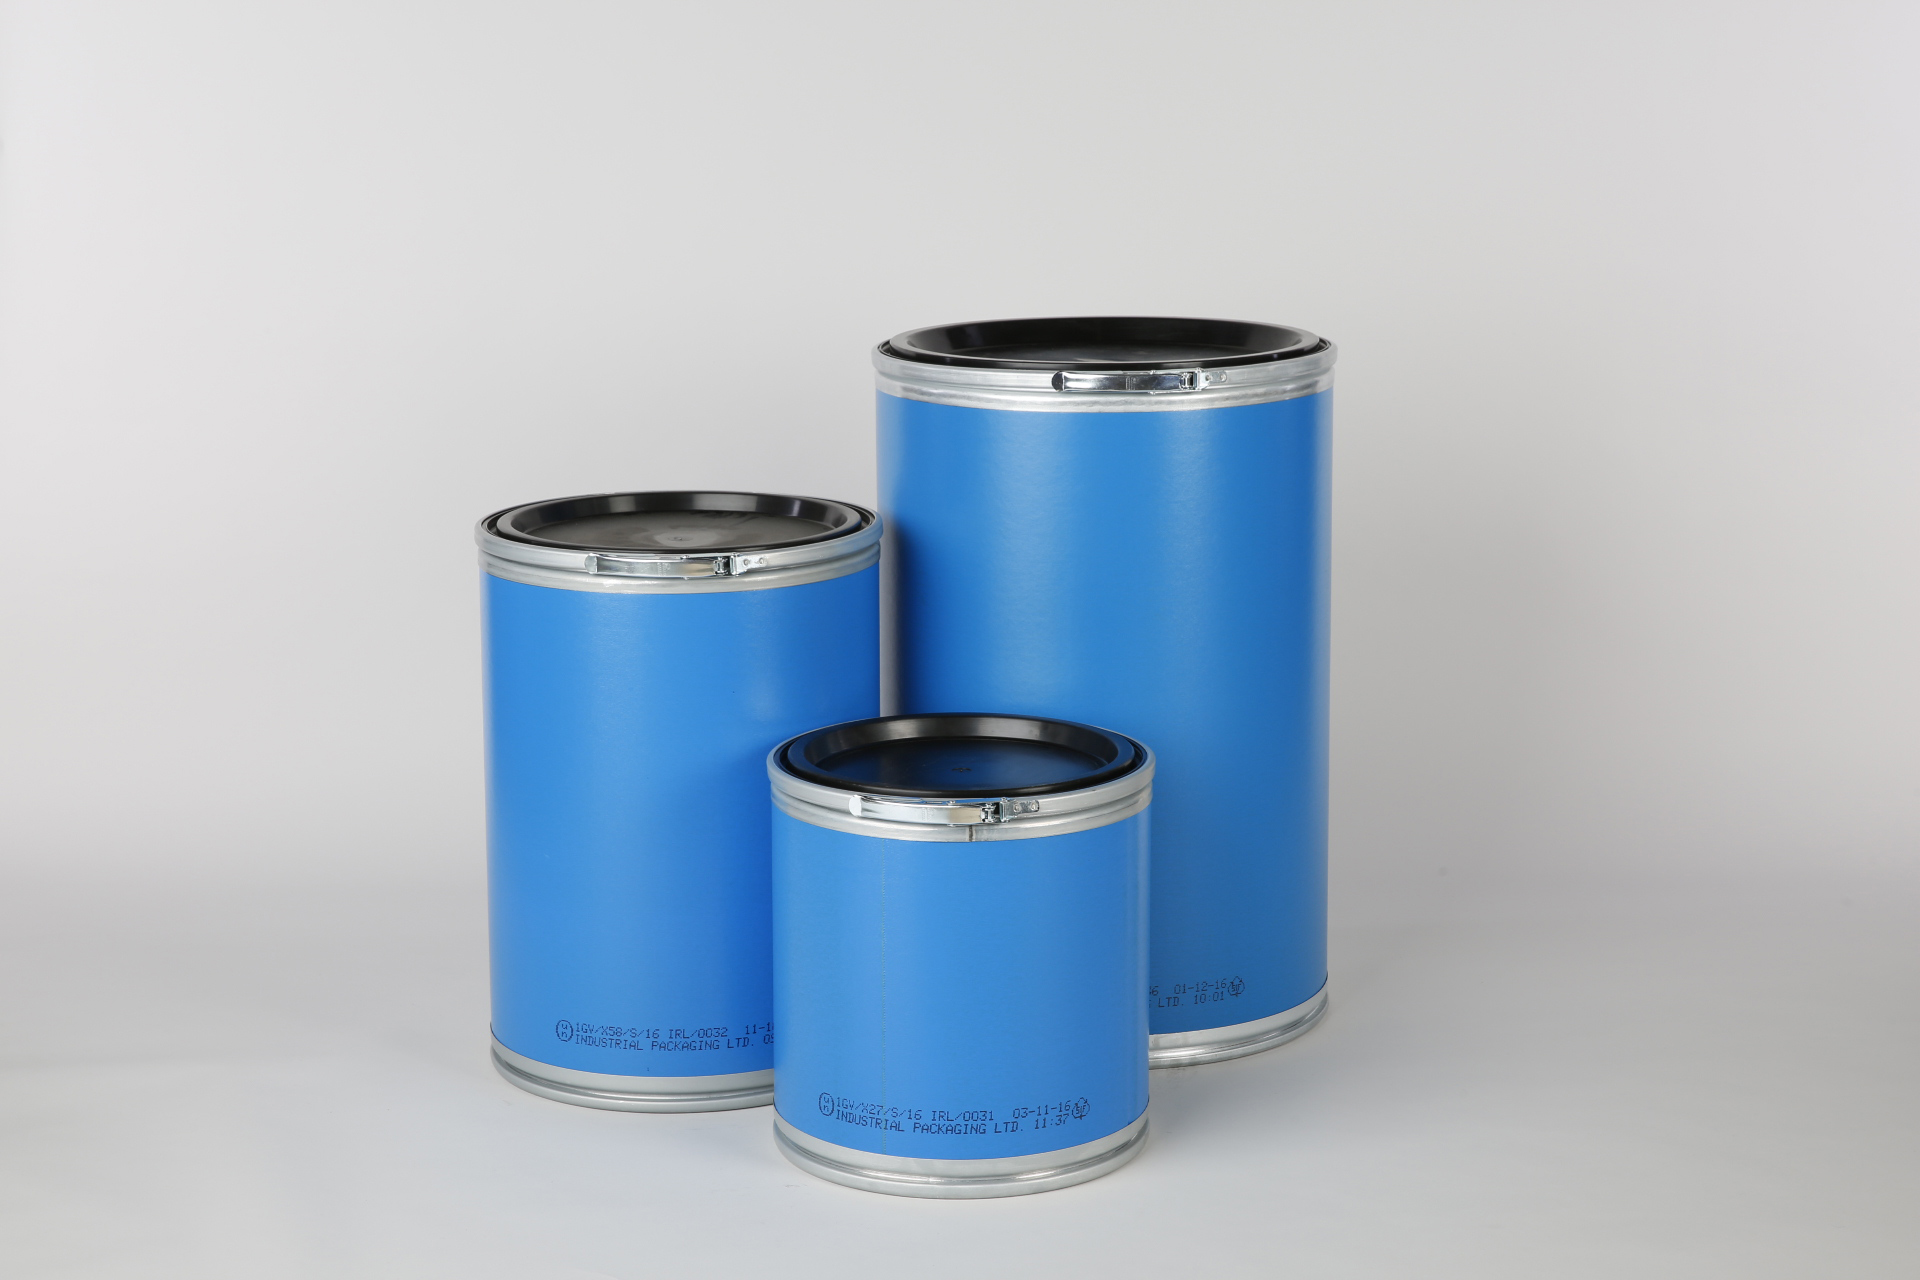 Three blue fibre drums of different sizes